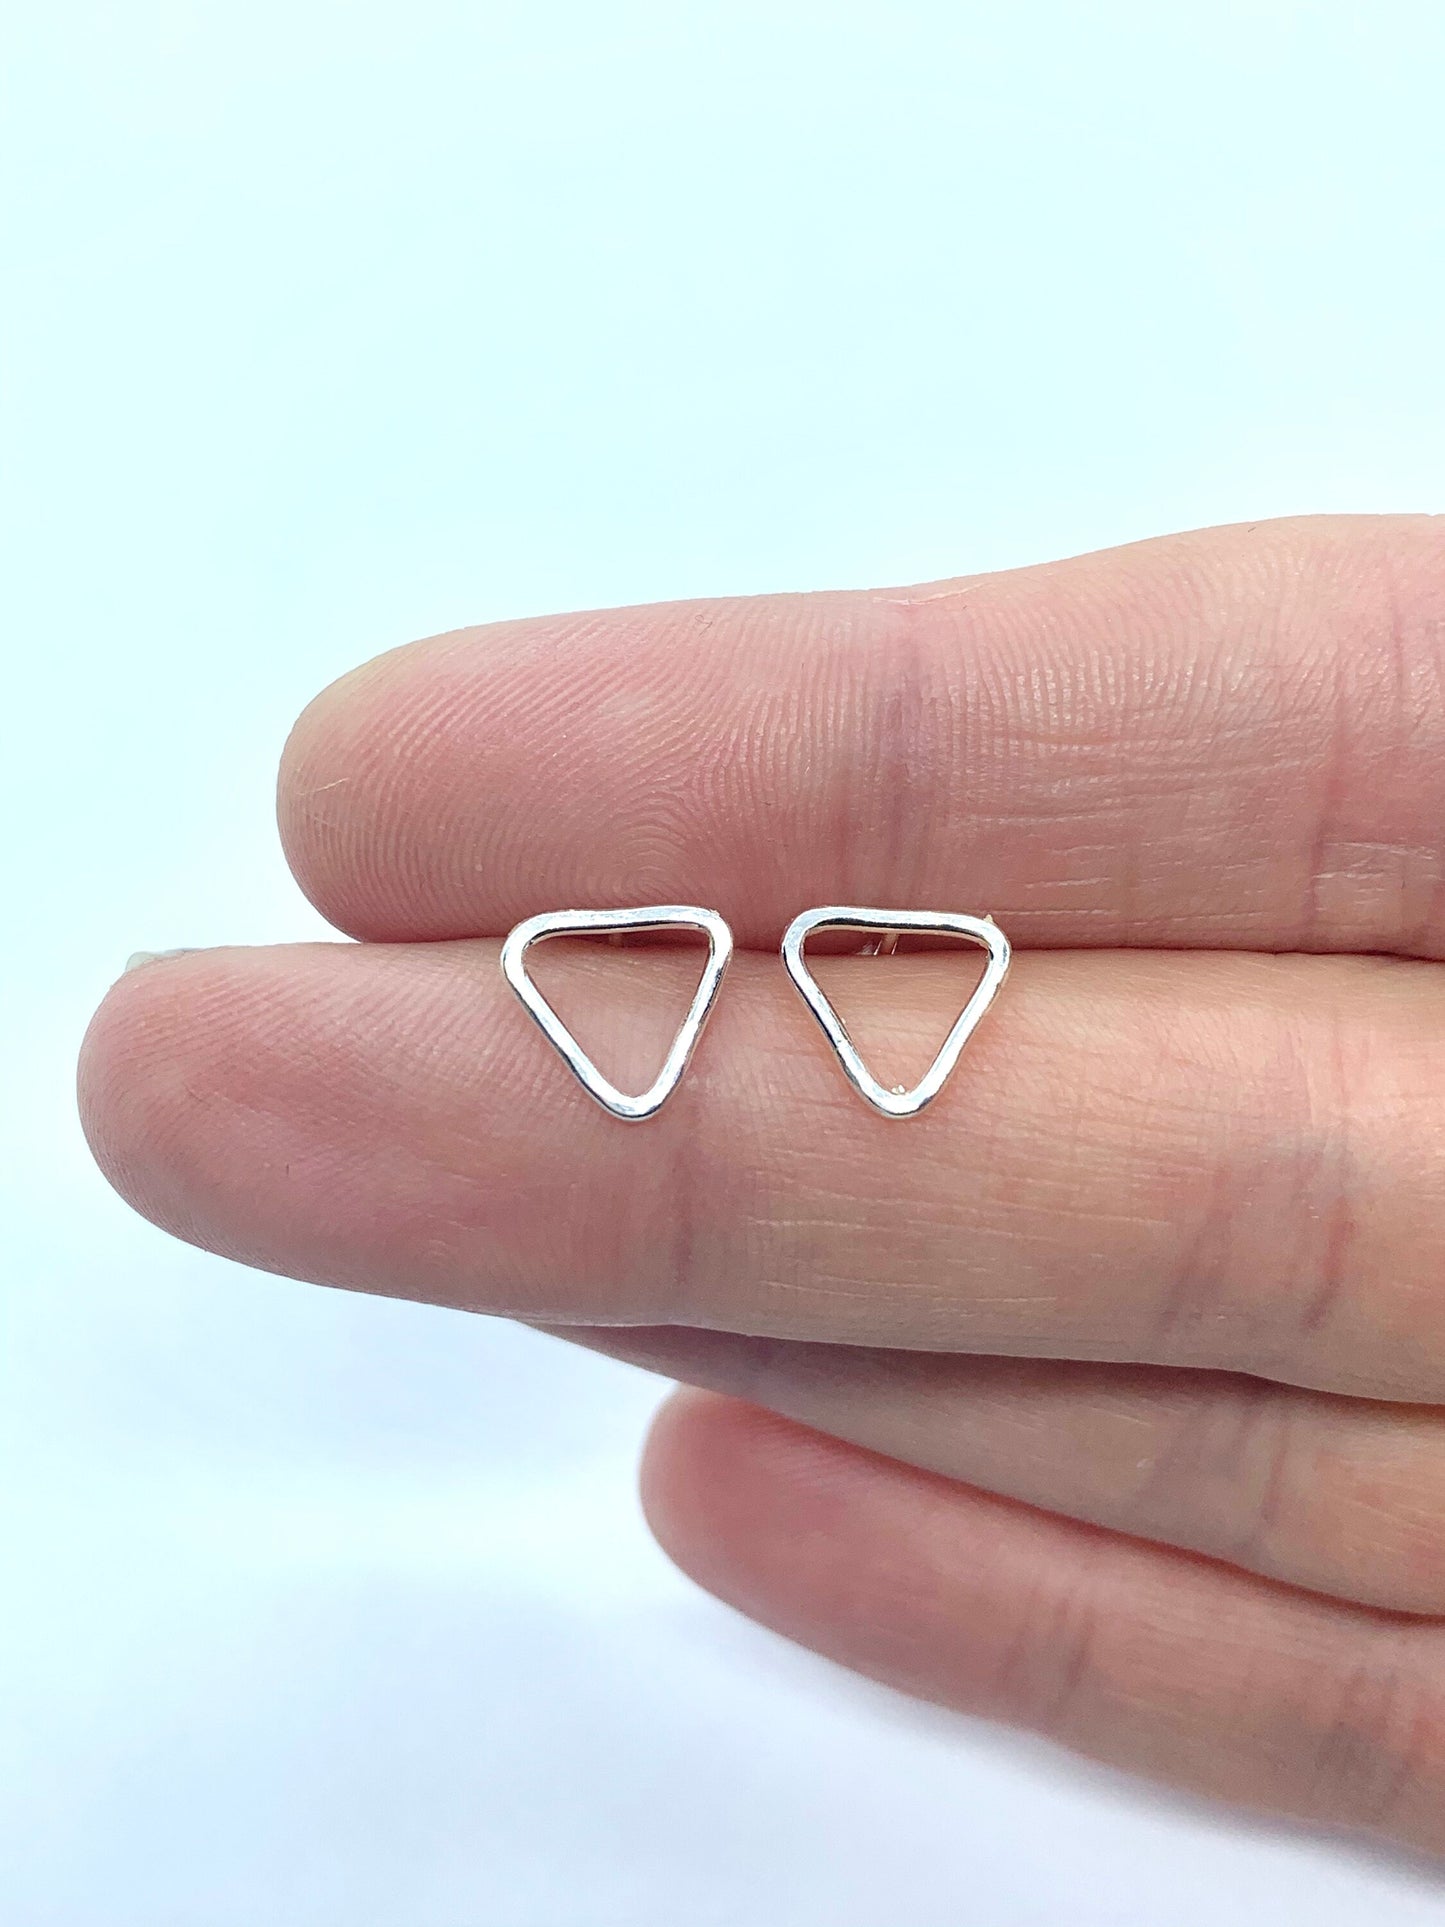 Small silver triangle stud earrings